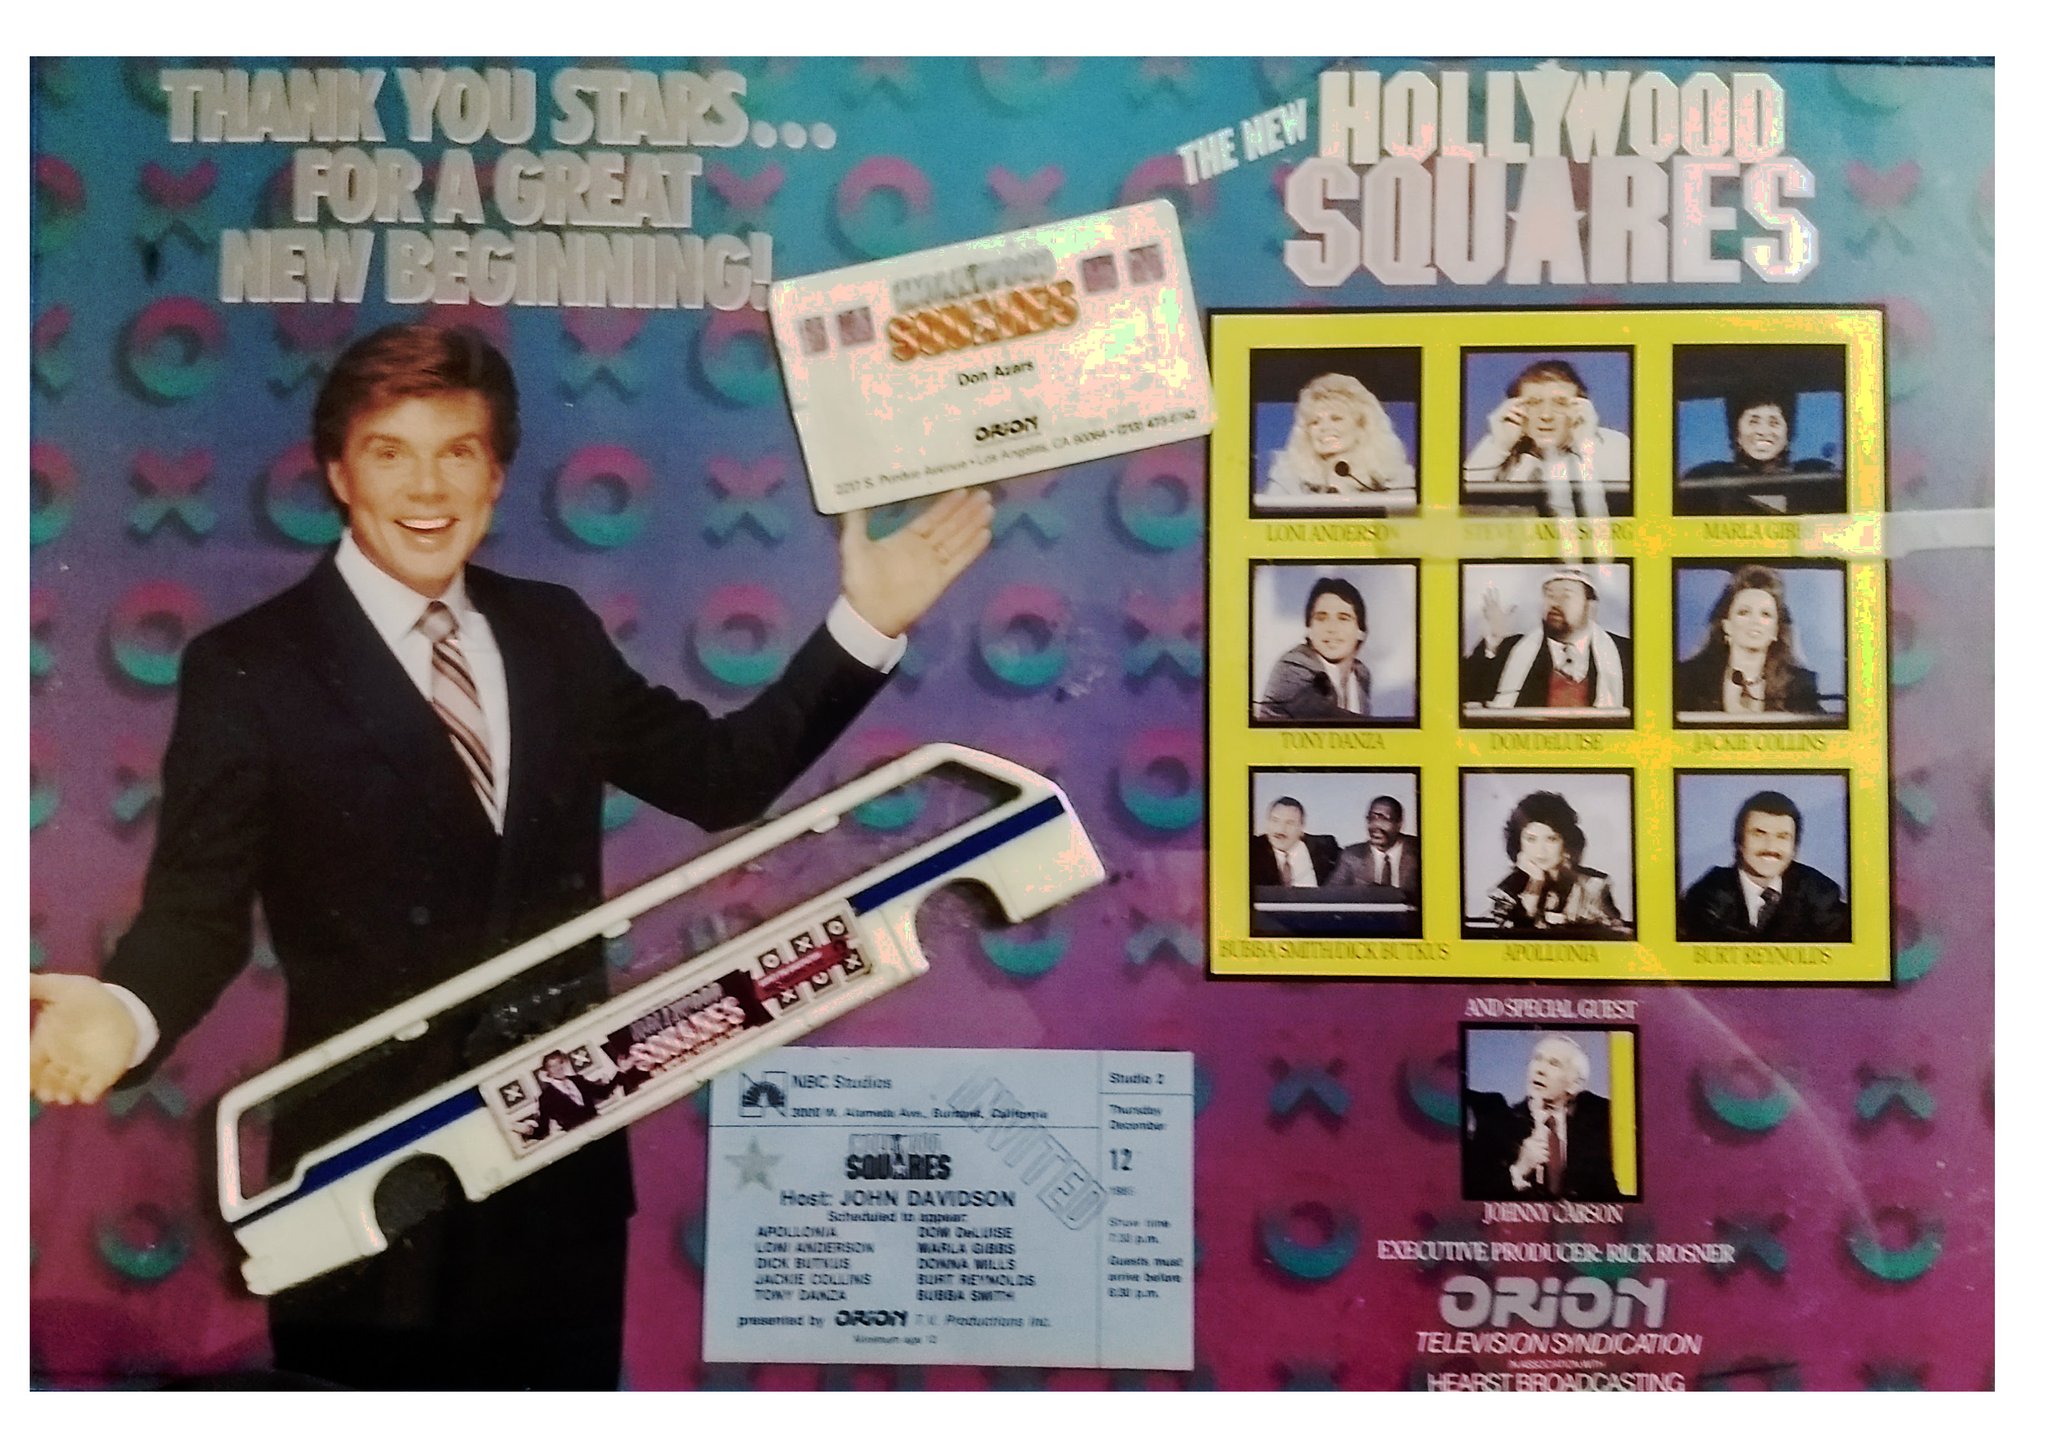 HAPPY BIRTHDAY to JOHN DAVIDSON, former host of THE NEW HOLLYWOOD SQUARES (and some other showbiz credits). 